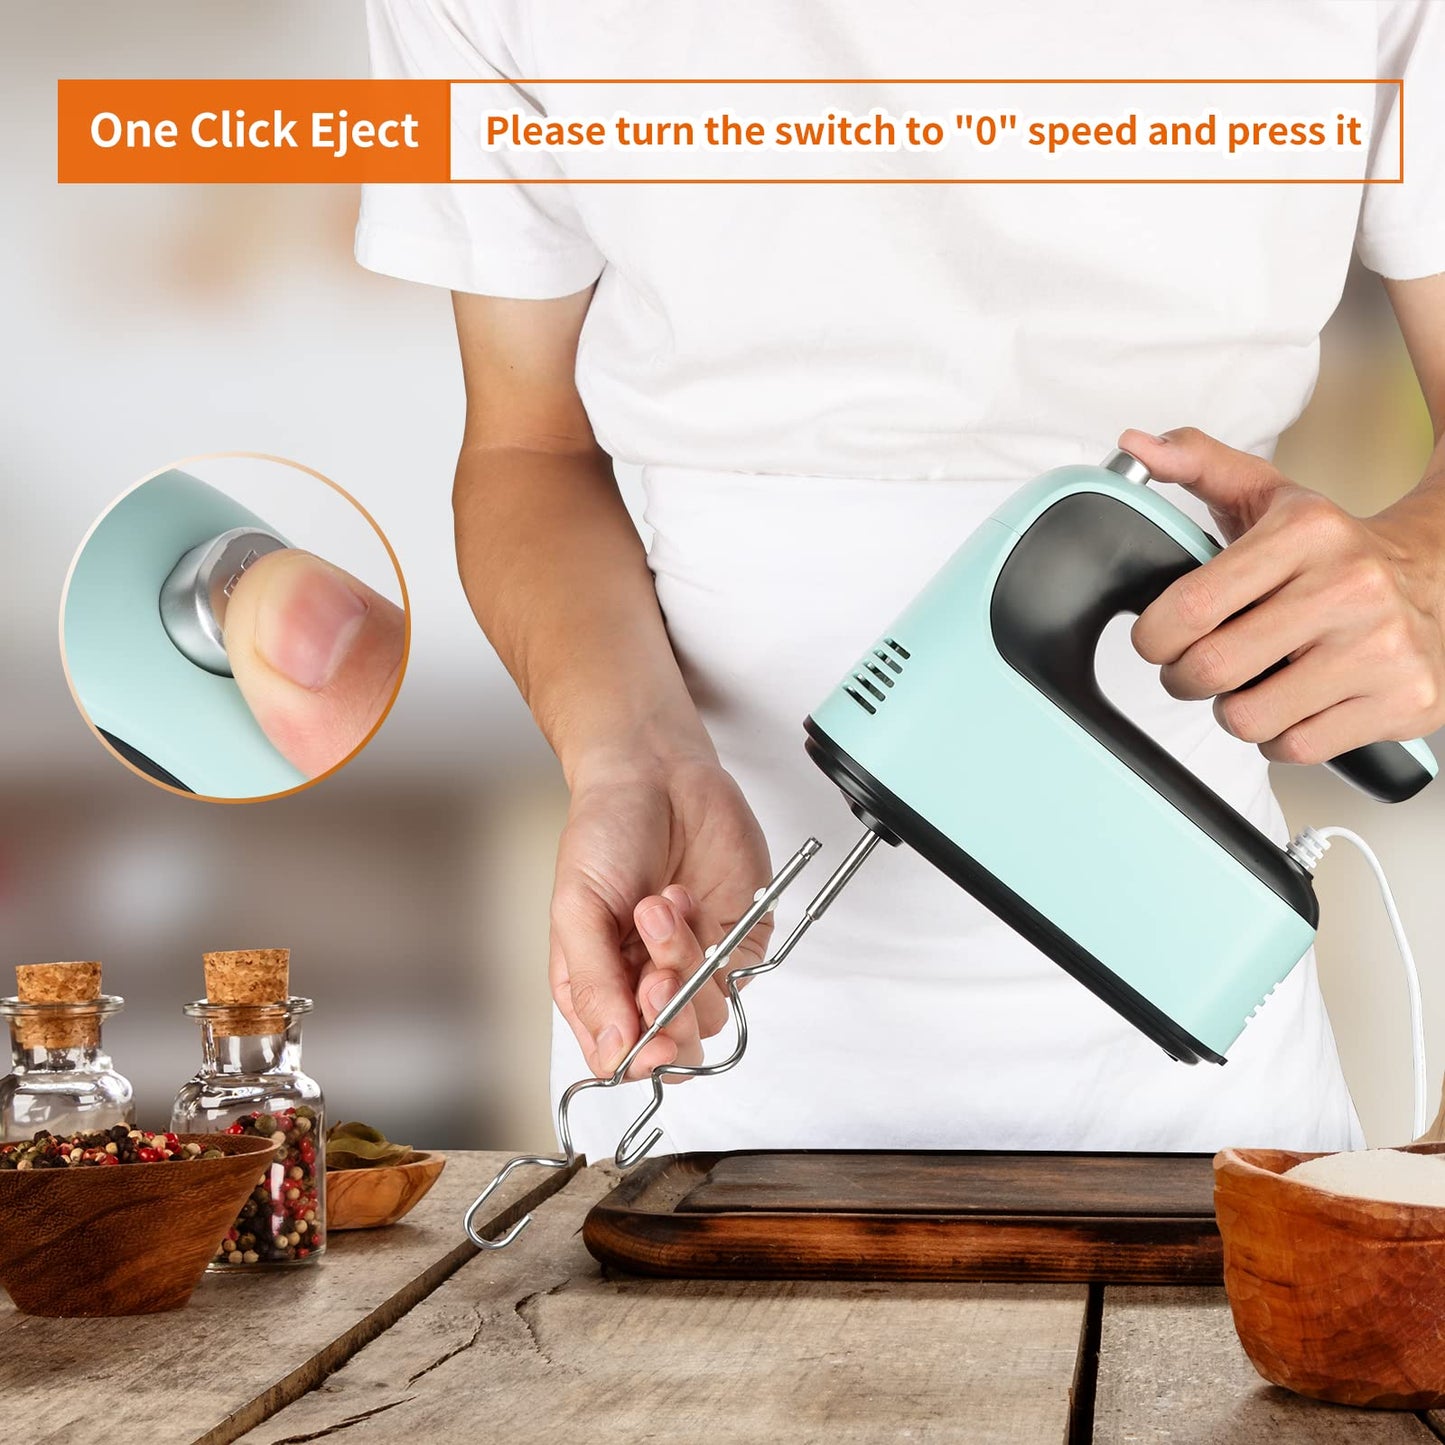 Yomelo 9-Speed Digital Hand Mixer Electric, 400W Powerful DC Motor, Baking Mixer Handheld with Snap-On Storage Case, Touch Button, Turbo Boost, Dough Hooks, Whisk (Ice Blue)